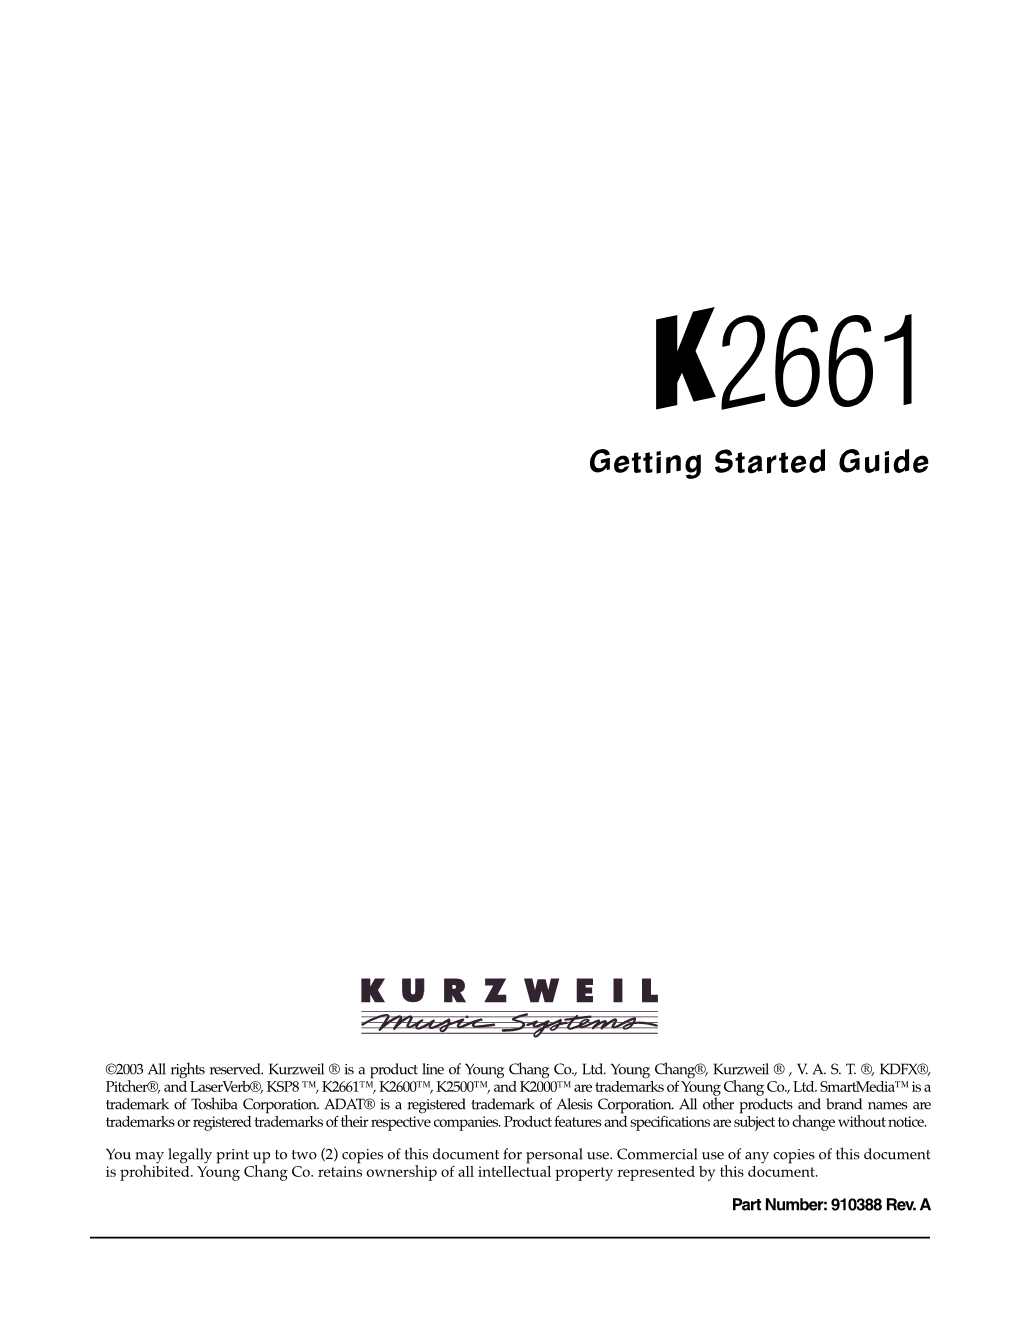 K2661 Getting Started Guide